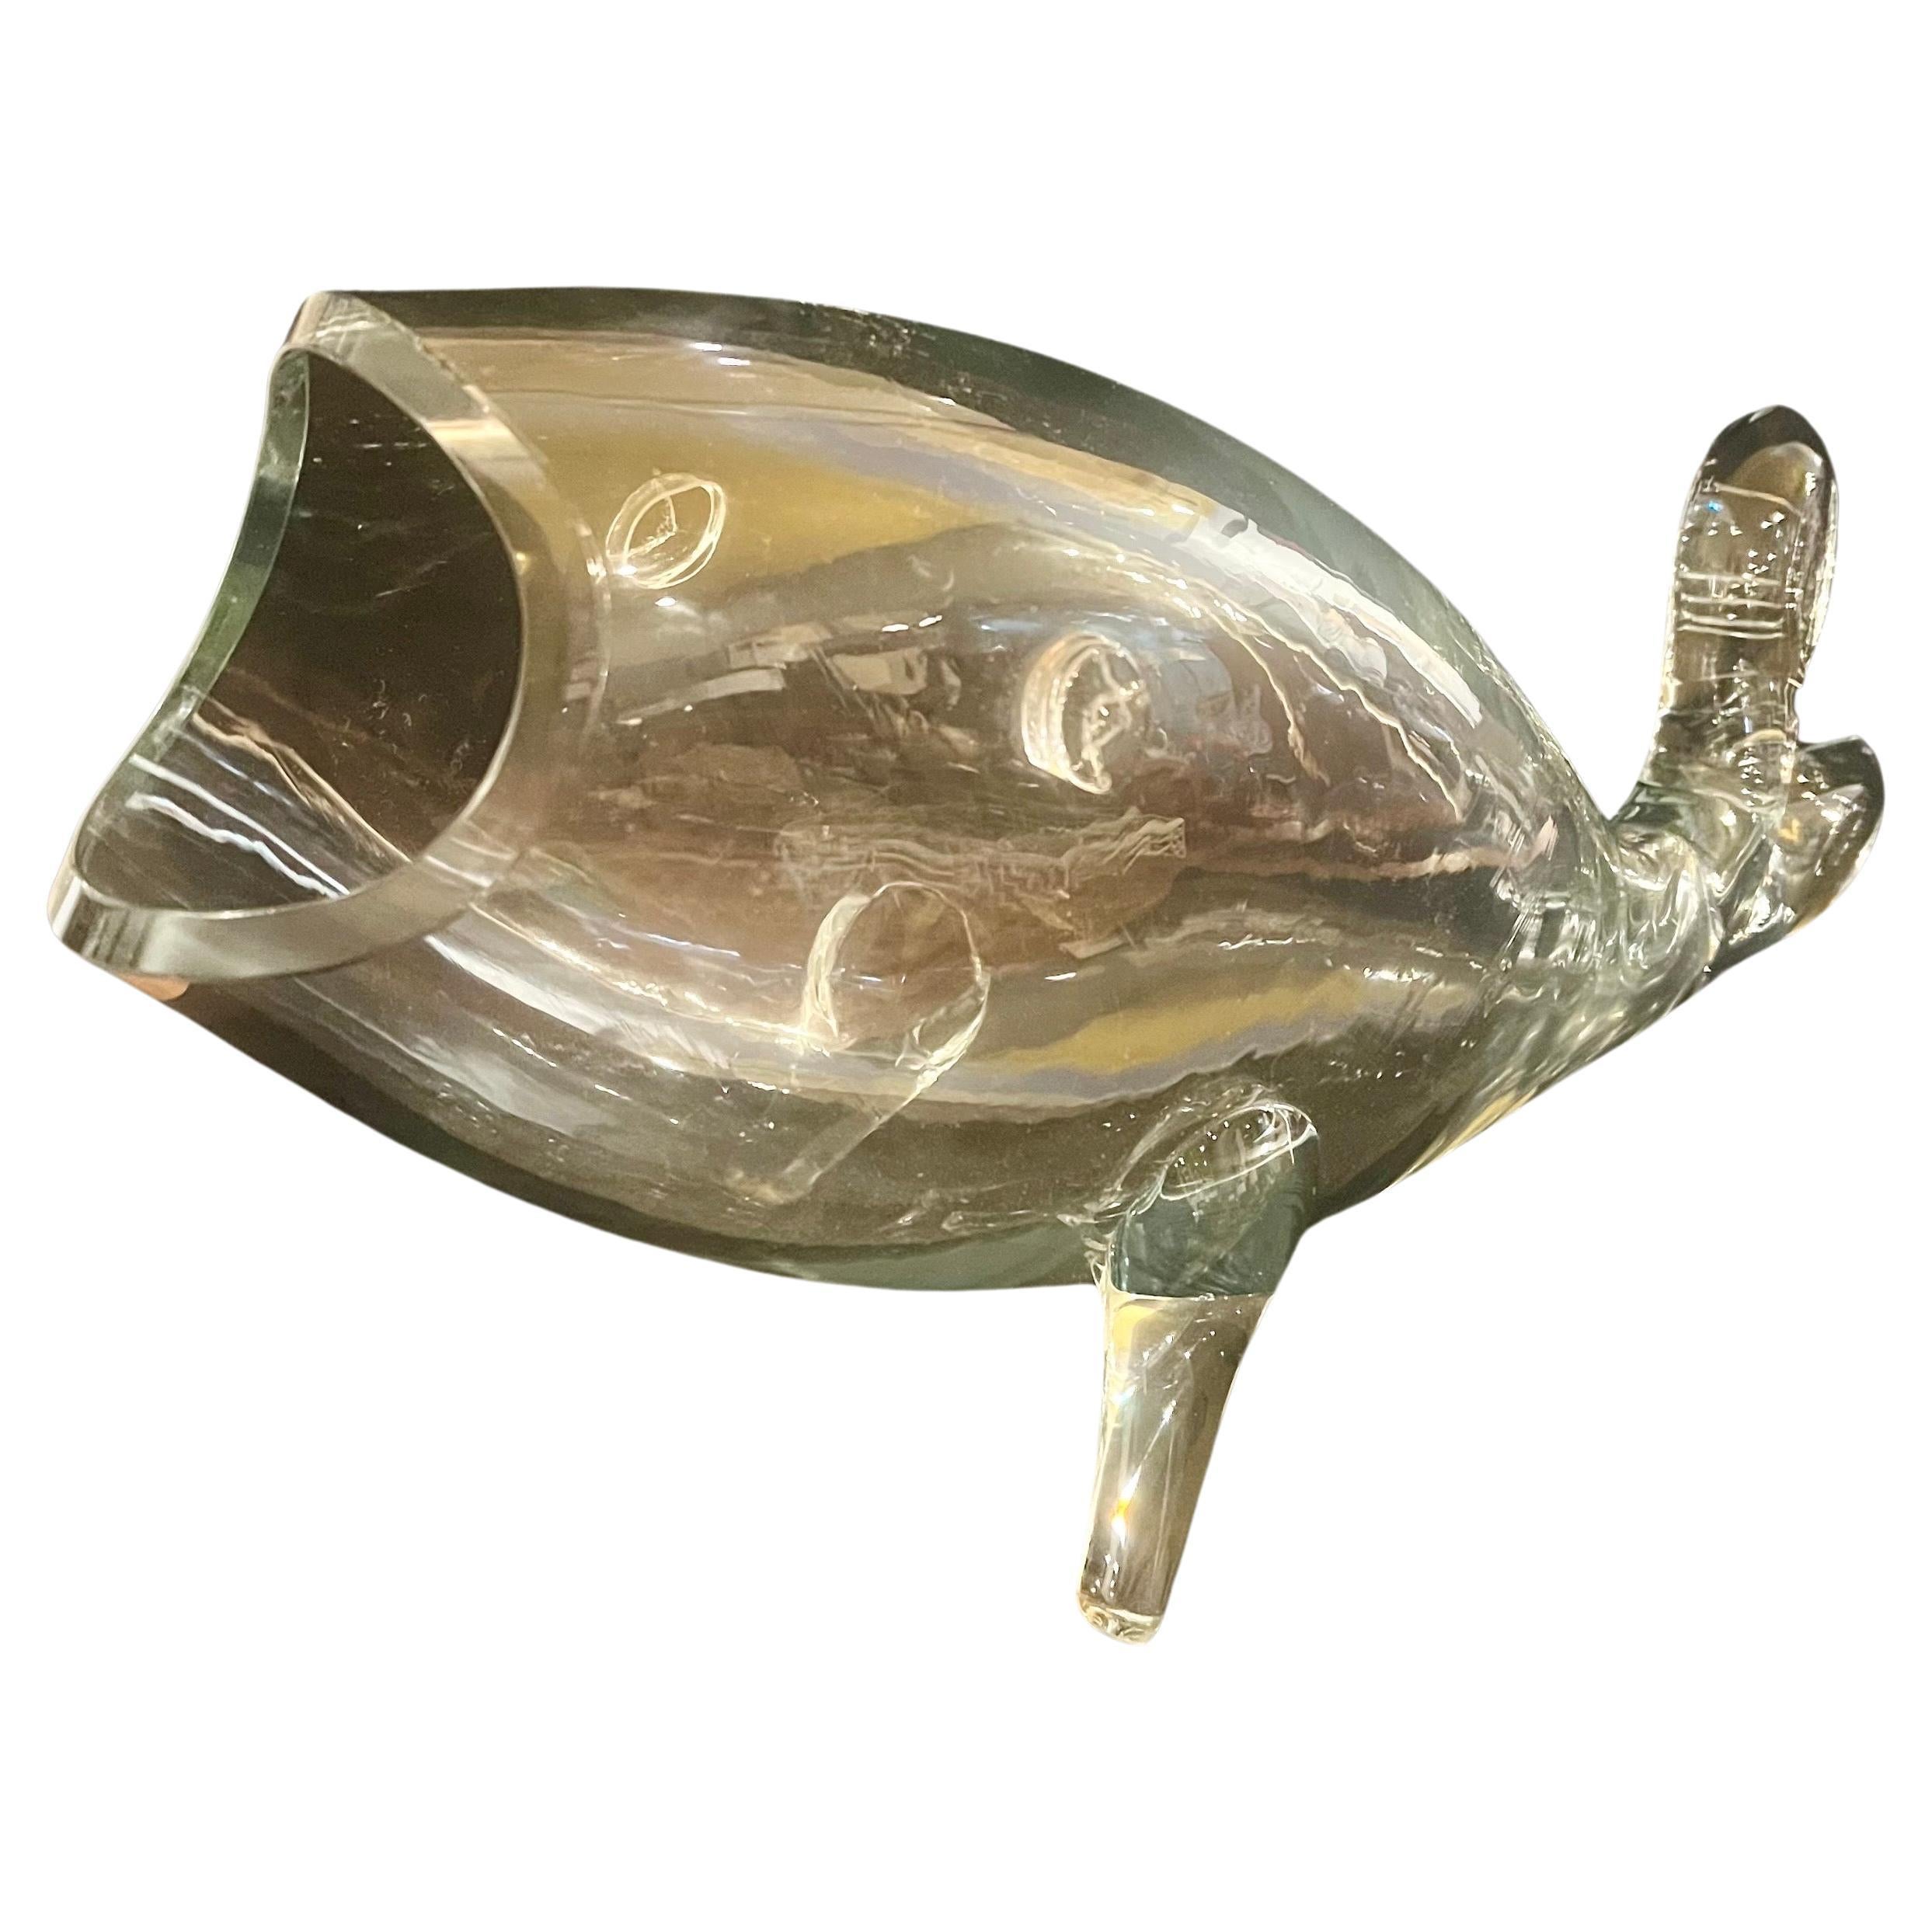 Fun midcentury clear glass collectible fish vase by Blenko, circa the 1970s. Stylish and chic piece of midcentury decor.